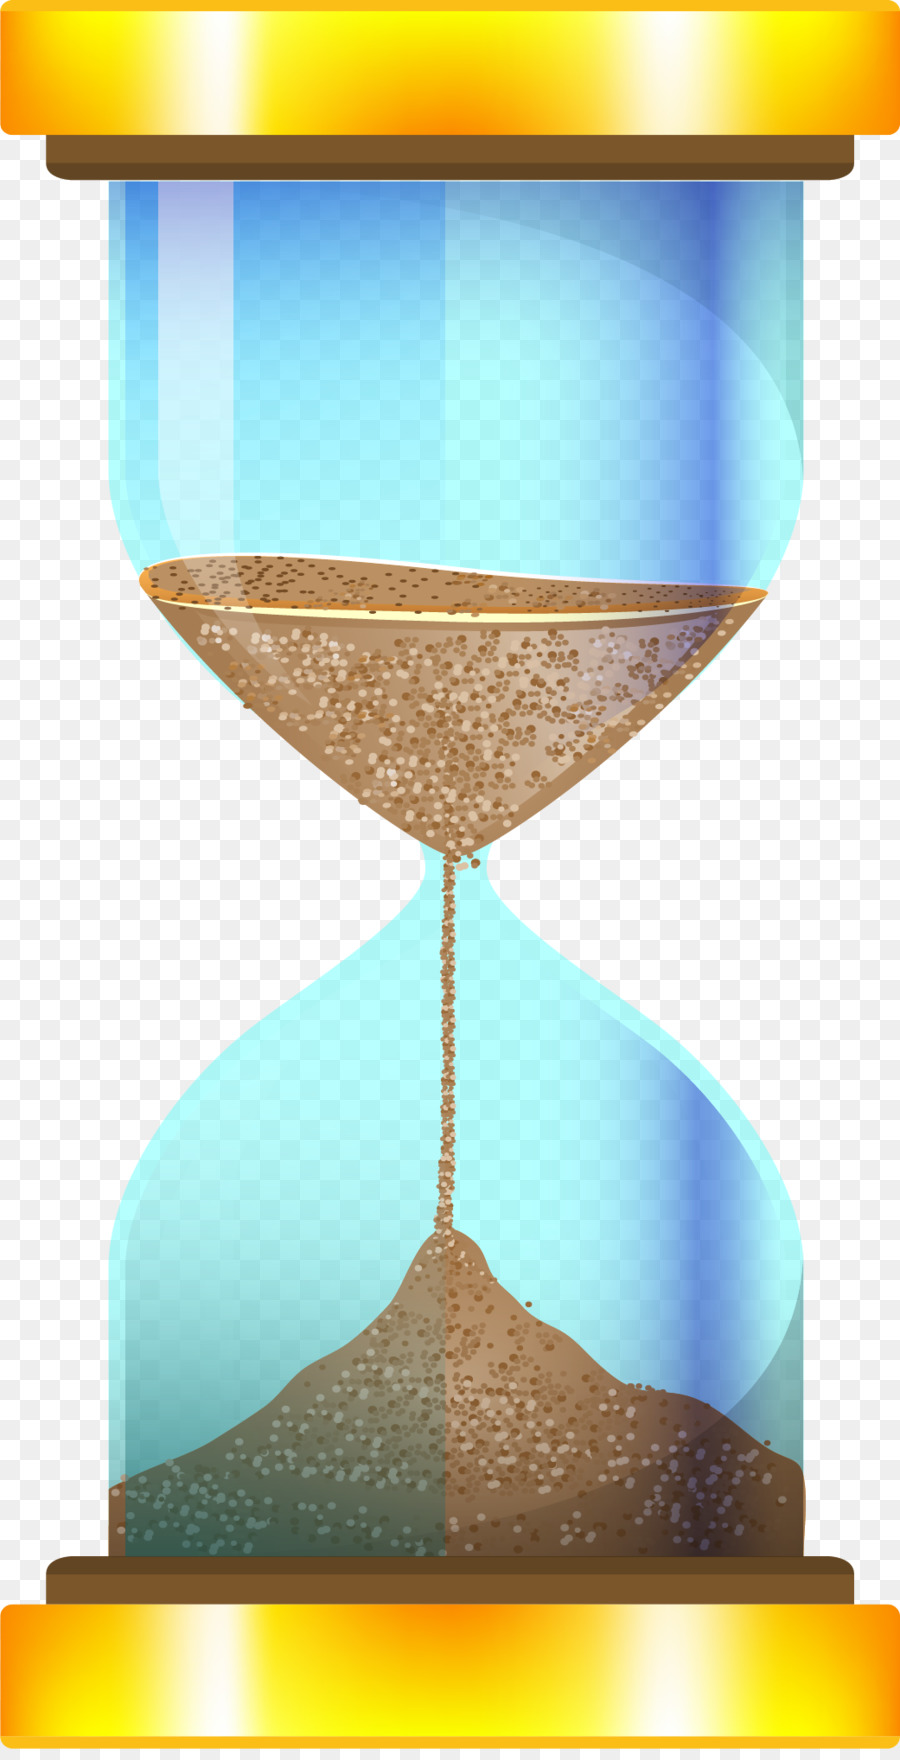 Hourglass Transparency and translucency Funnel - Transparent glass hourglass png download - 1041*2023 - Free Transparent Hourglass png Download.